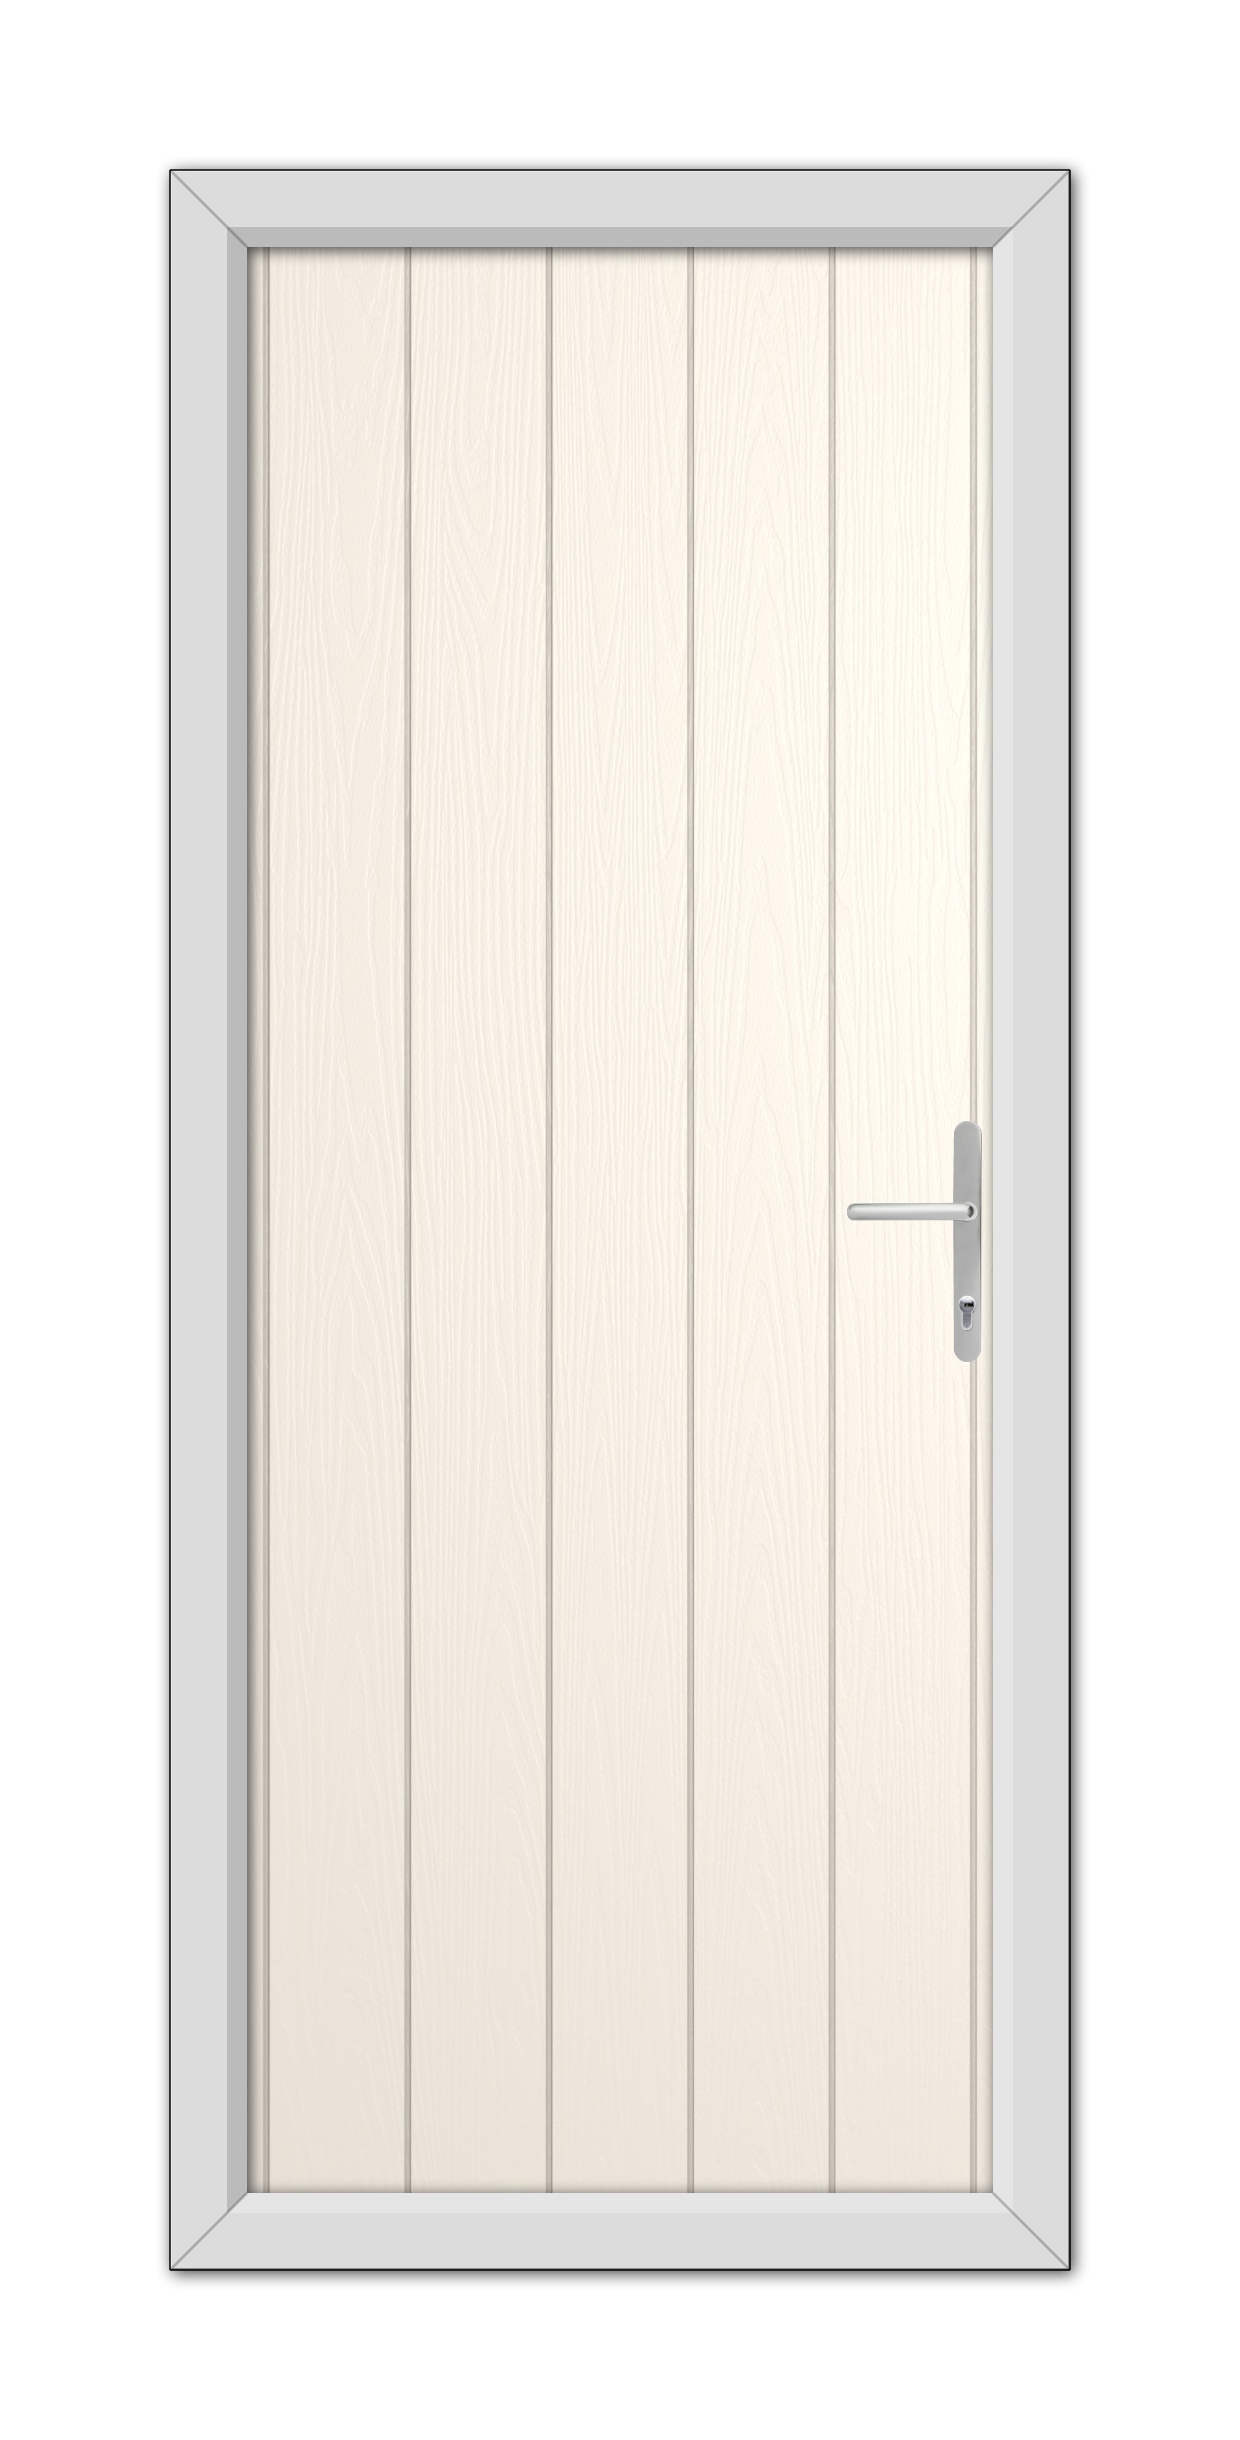 A closed White Foil Norfolk Solid Composite Door 48mm Timber Core with a silver handle, set in a grey metal frame.